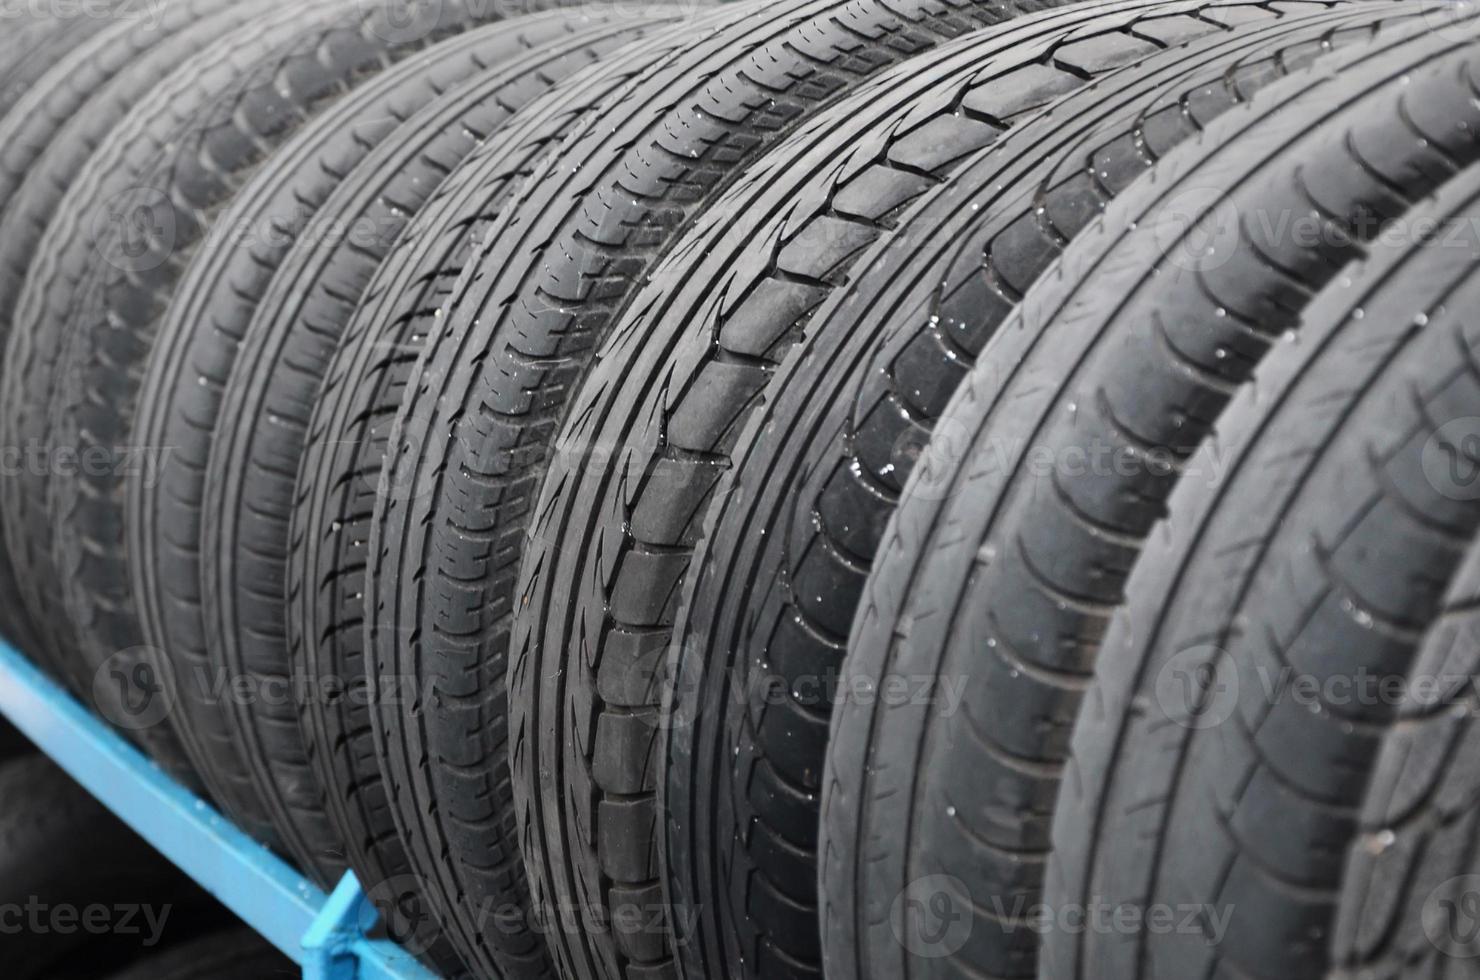 Rack with variety of car tires in automobile store. Many black tires. Tire stack background photo